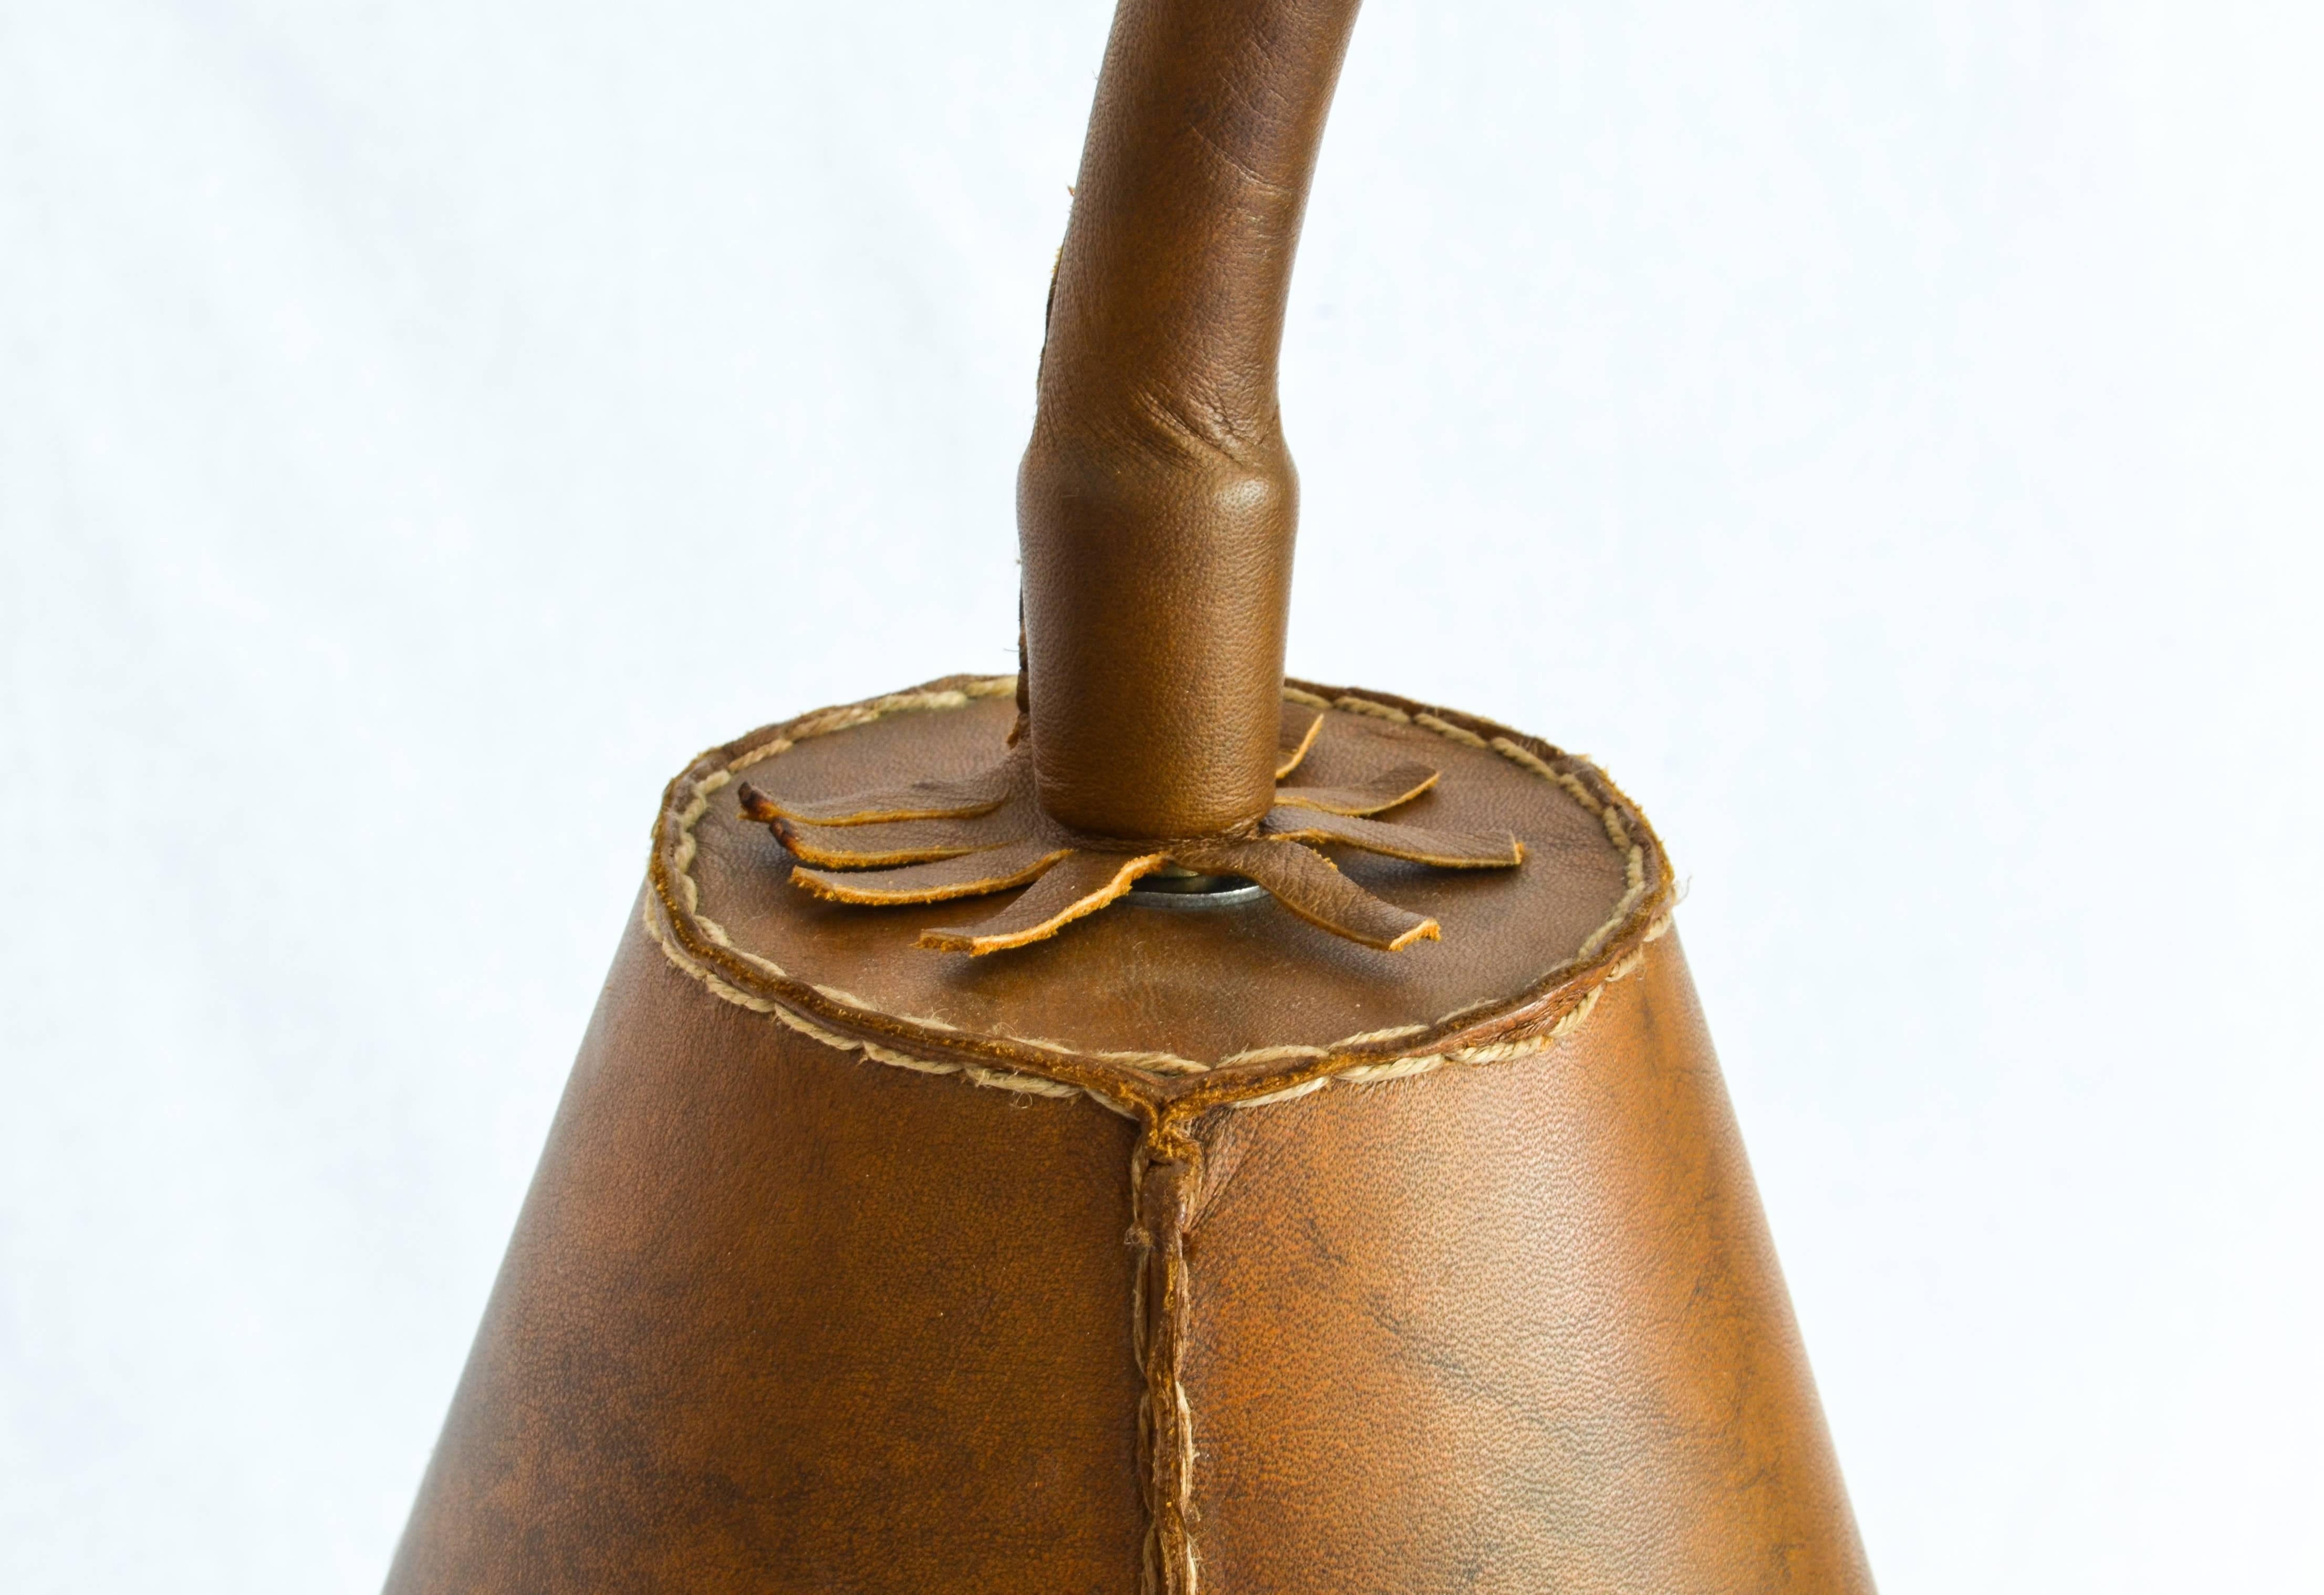 Vintage leather wrapped floor lamp with leather shade by Valenti, made in the 1960s in Spain.